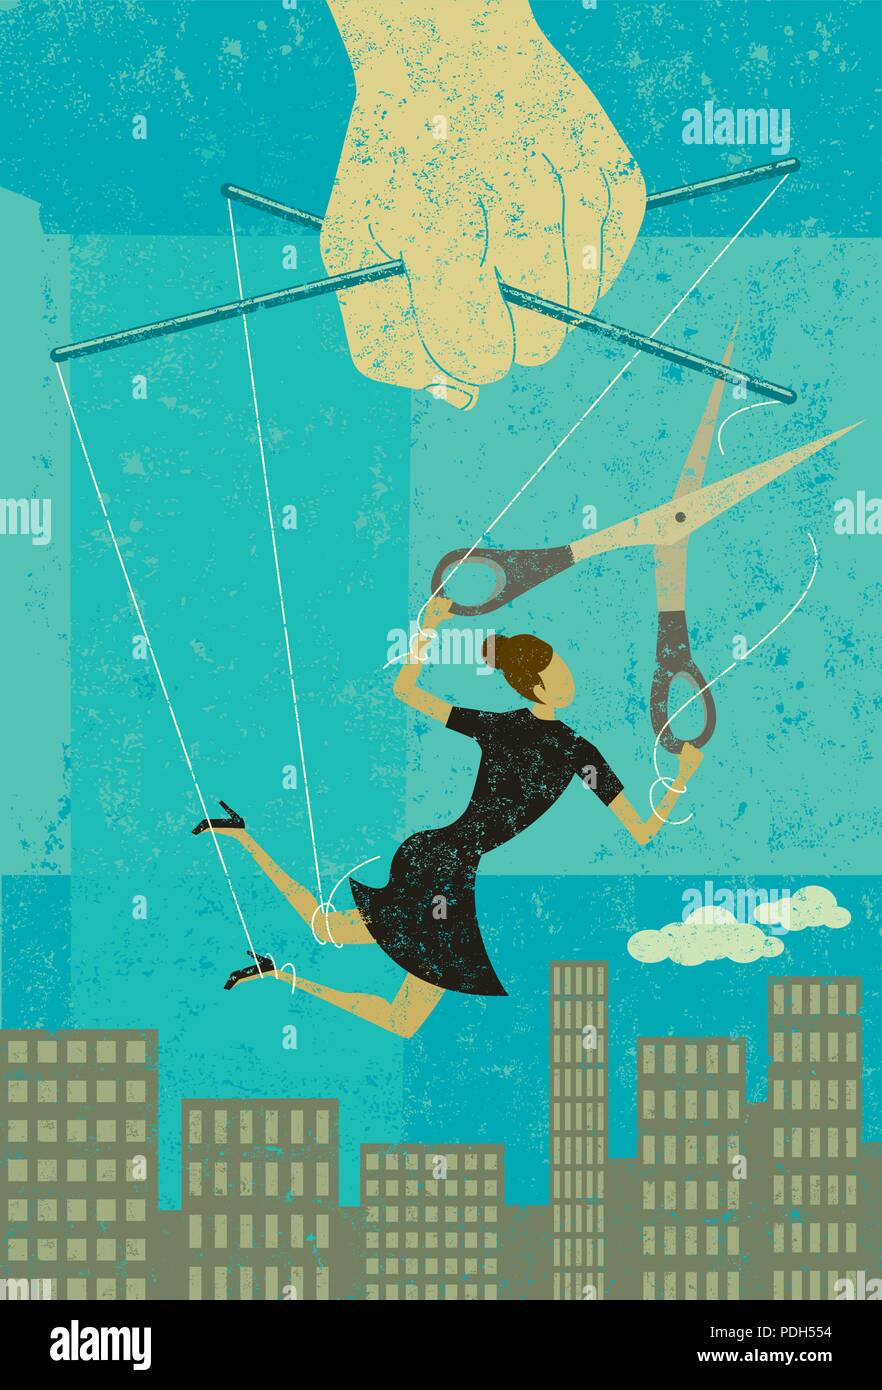 Escaping a controlling boss. A businesswoman, portrayed as a puppet on a string, cuts herself away from manipulative control to gain her freedom. Stock Vector